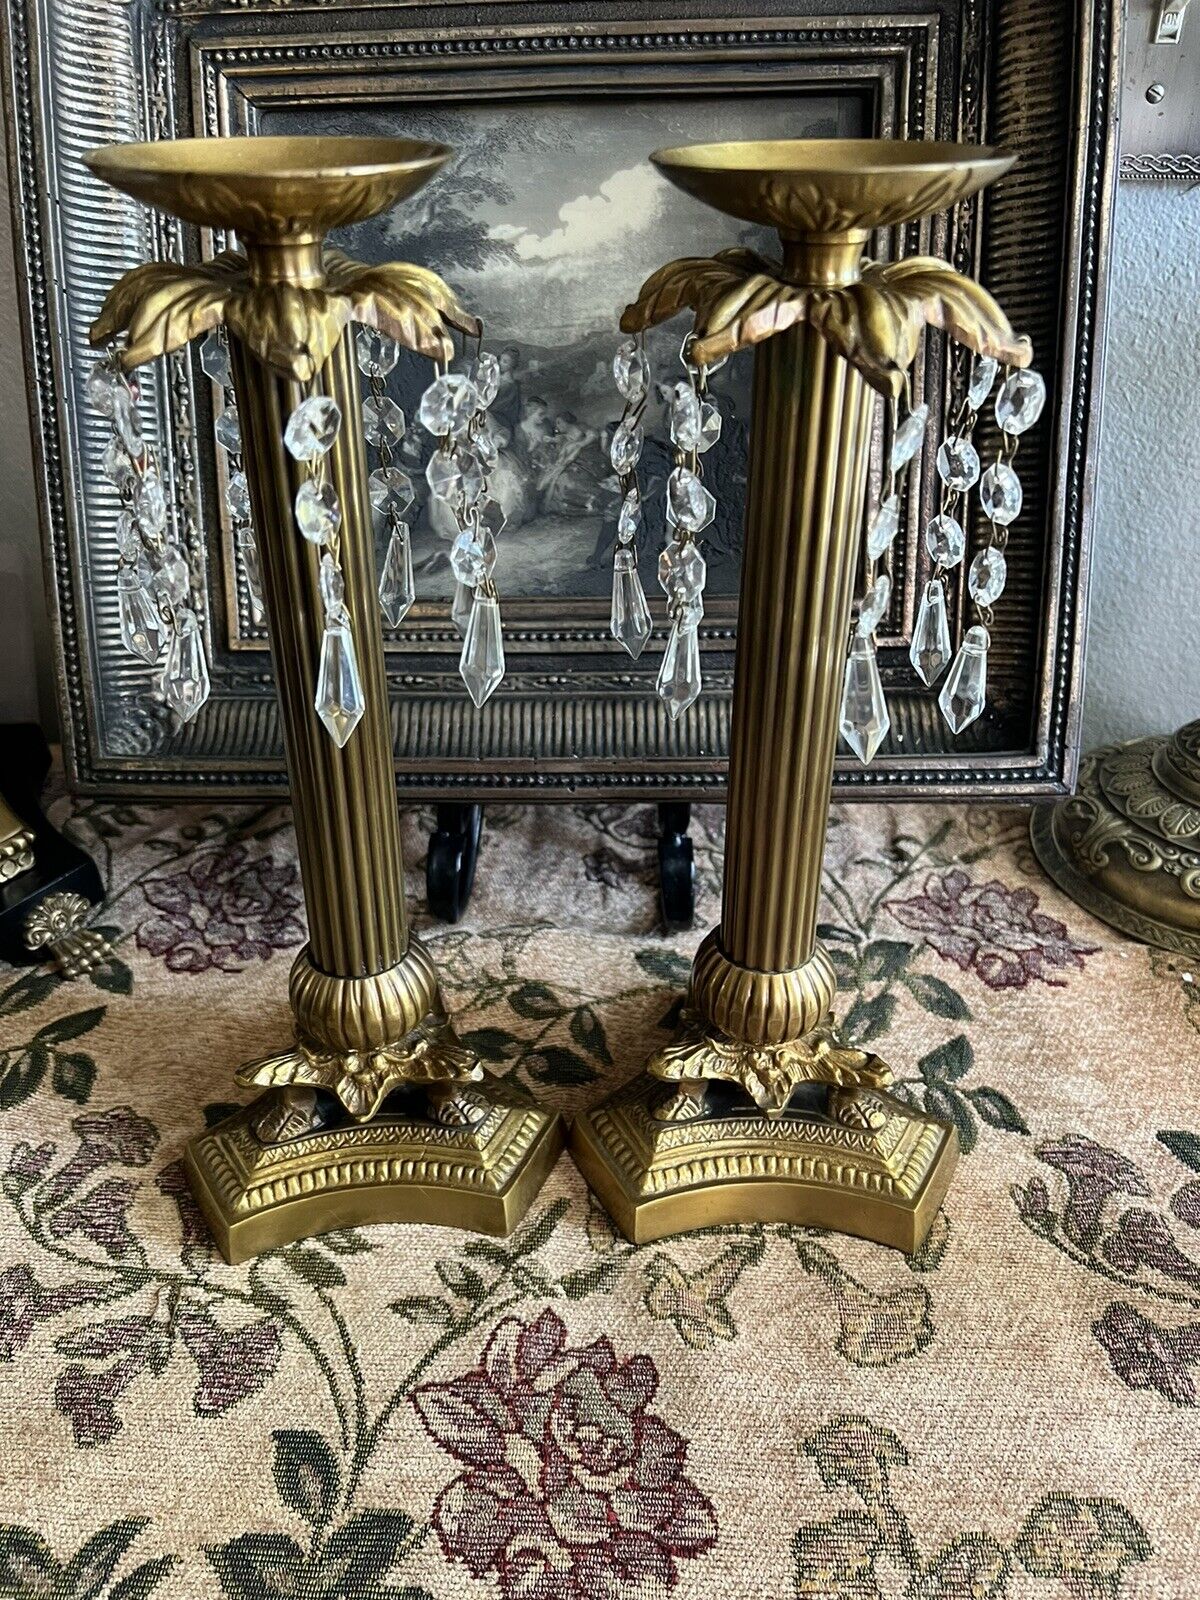 PAIR OF ANTIQUE FRENCH GILT BRONZE CANDLE HOLDERS,NEOCLASSICAL STYLE,